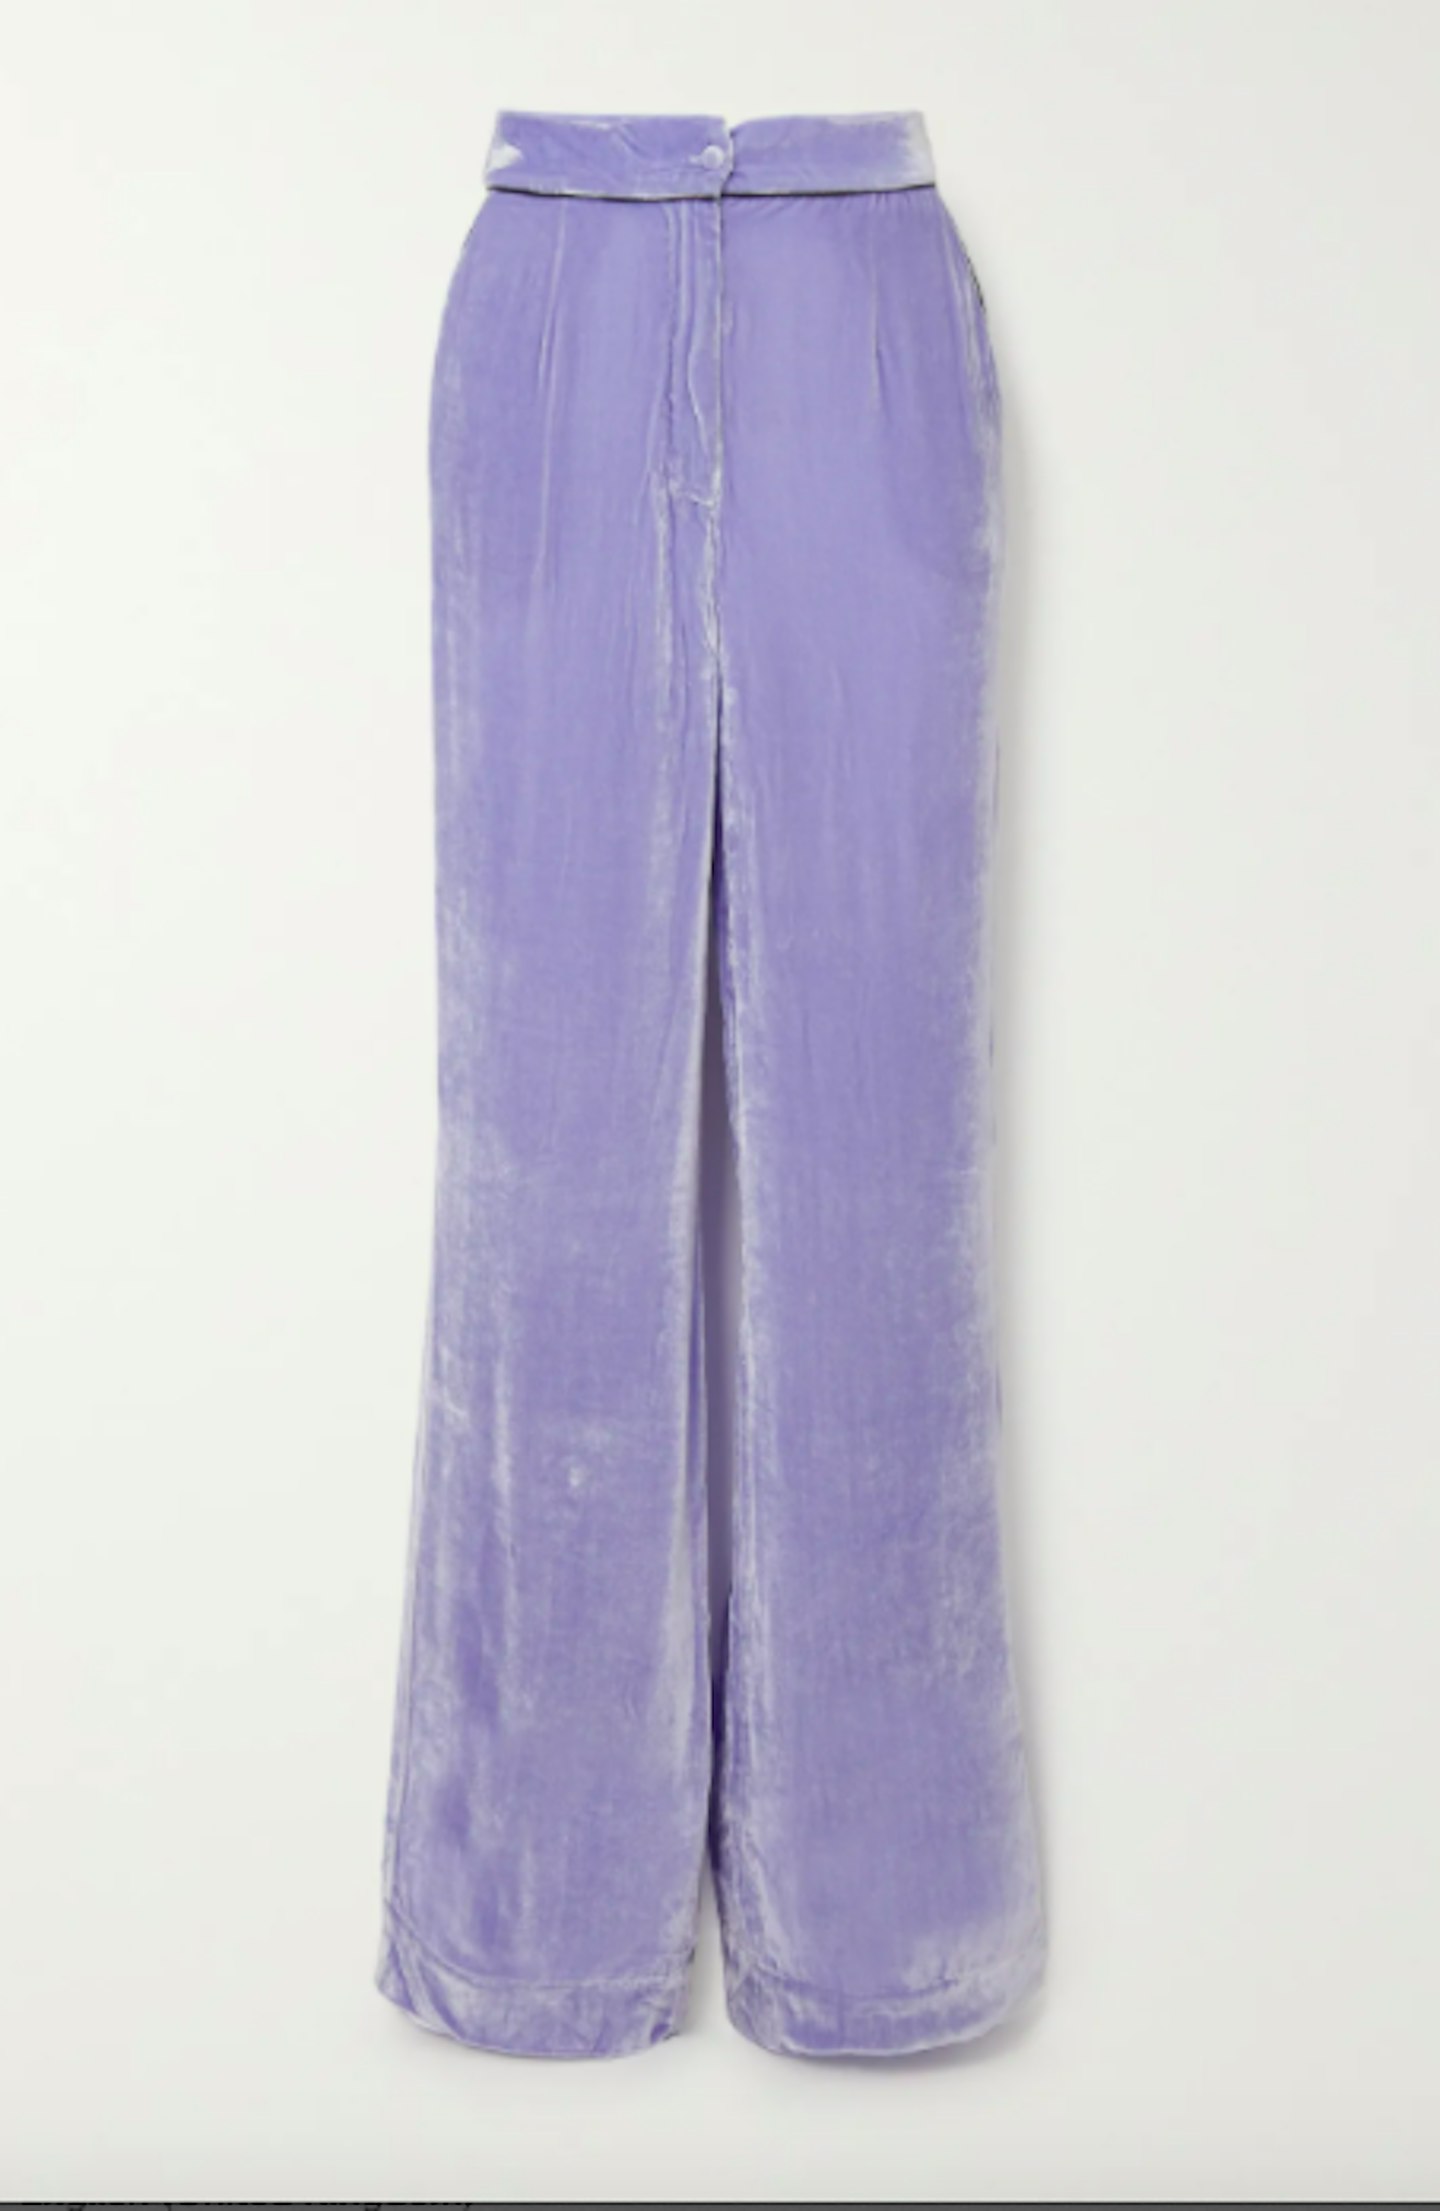 Sleeping With Jacques, Velvet Wide Leg Trousers, £169 at Net-a-Porter